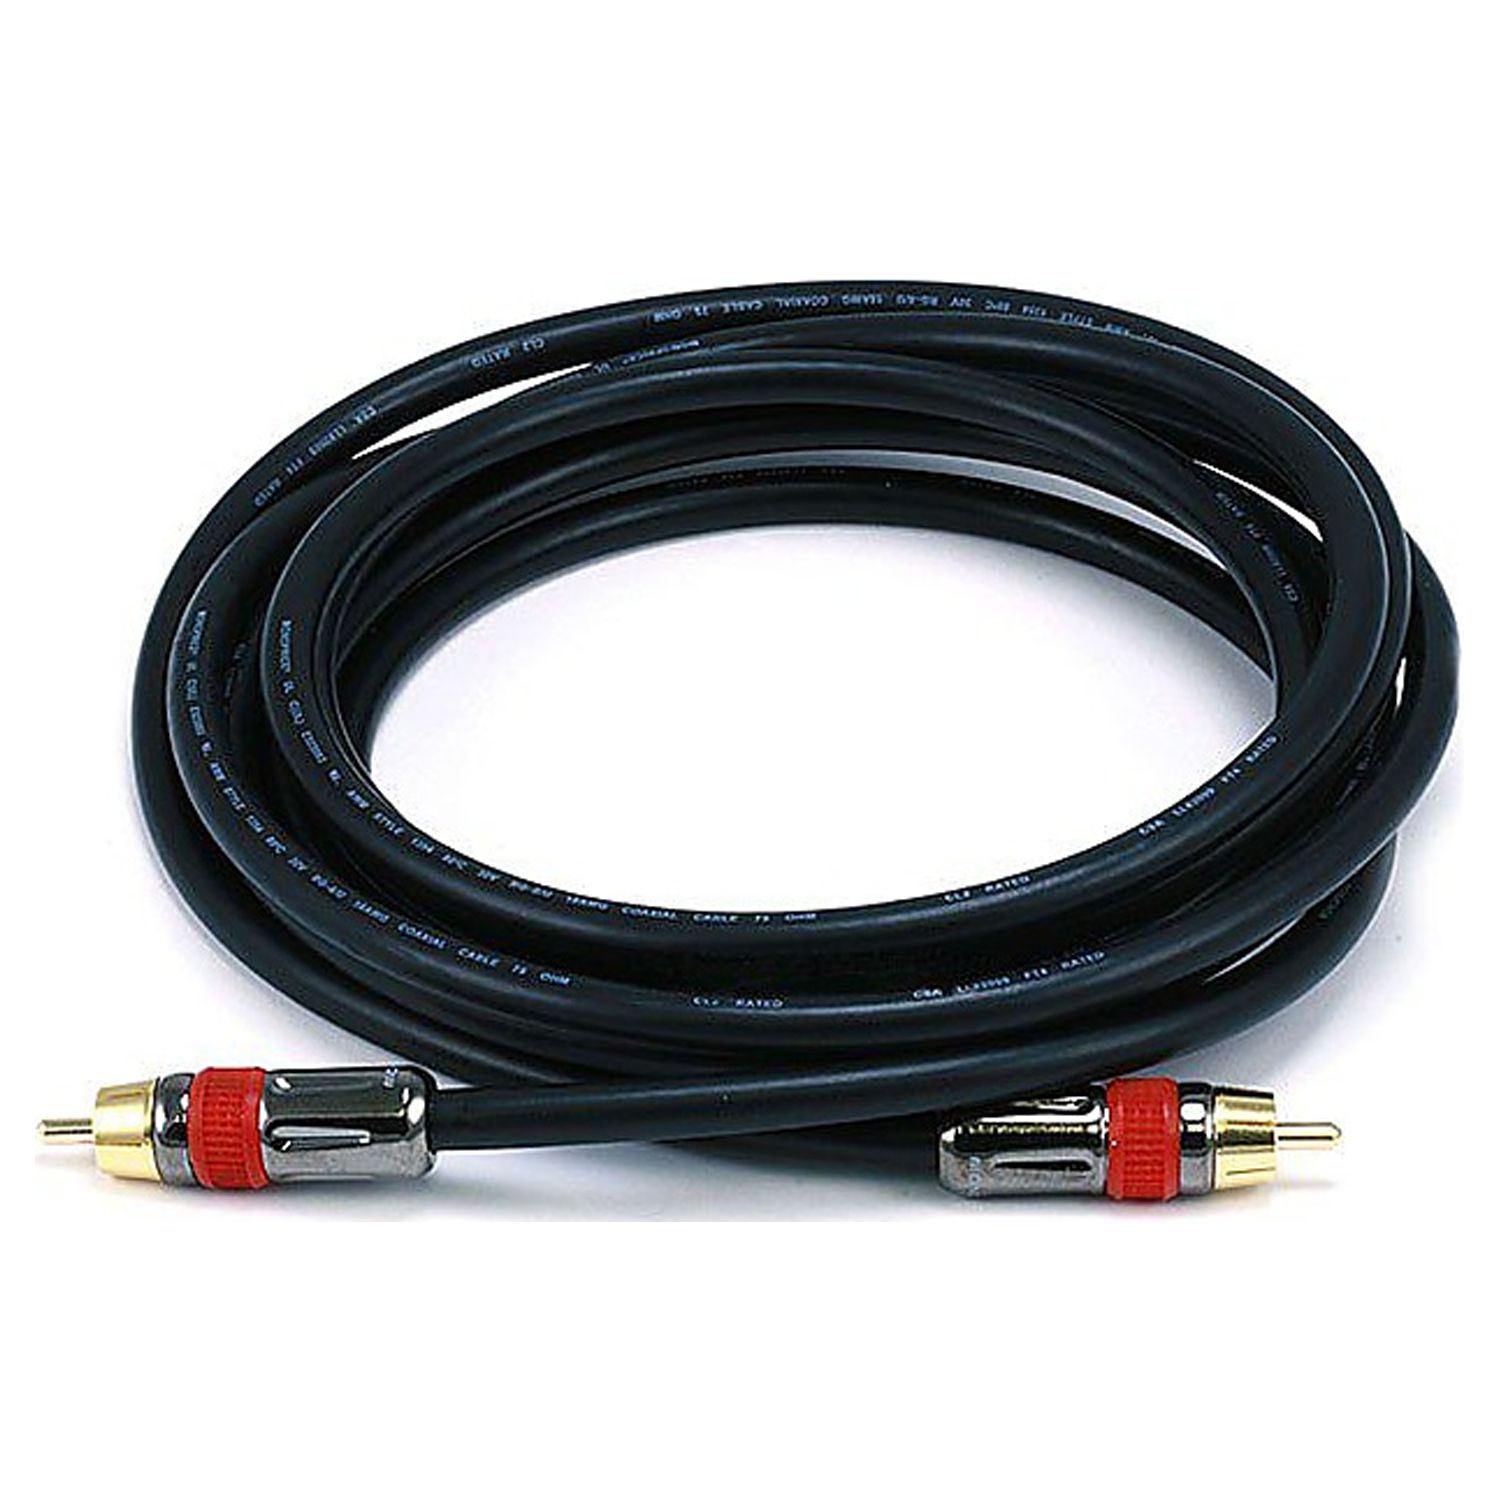 Monoprice 10' CL2 High-Quality RCA Male to Male Audio/Video Coaxial Cable Black 106305 - image 1 of 2